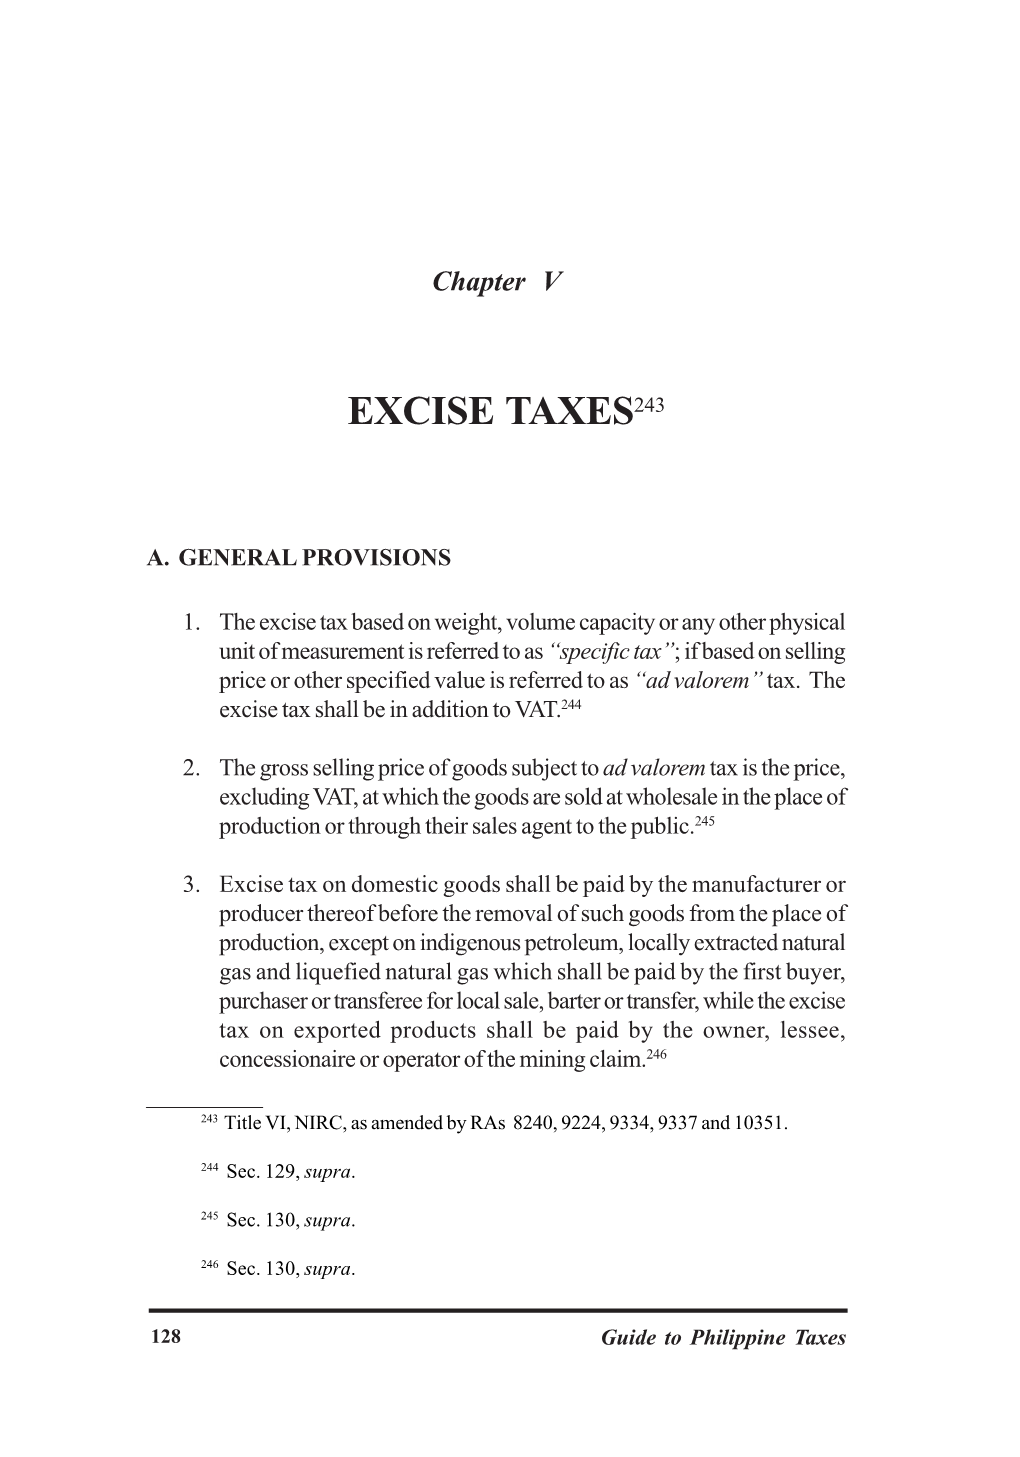 Excise Taxes243